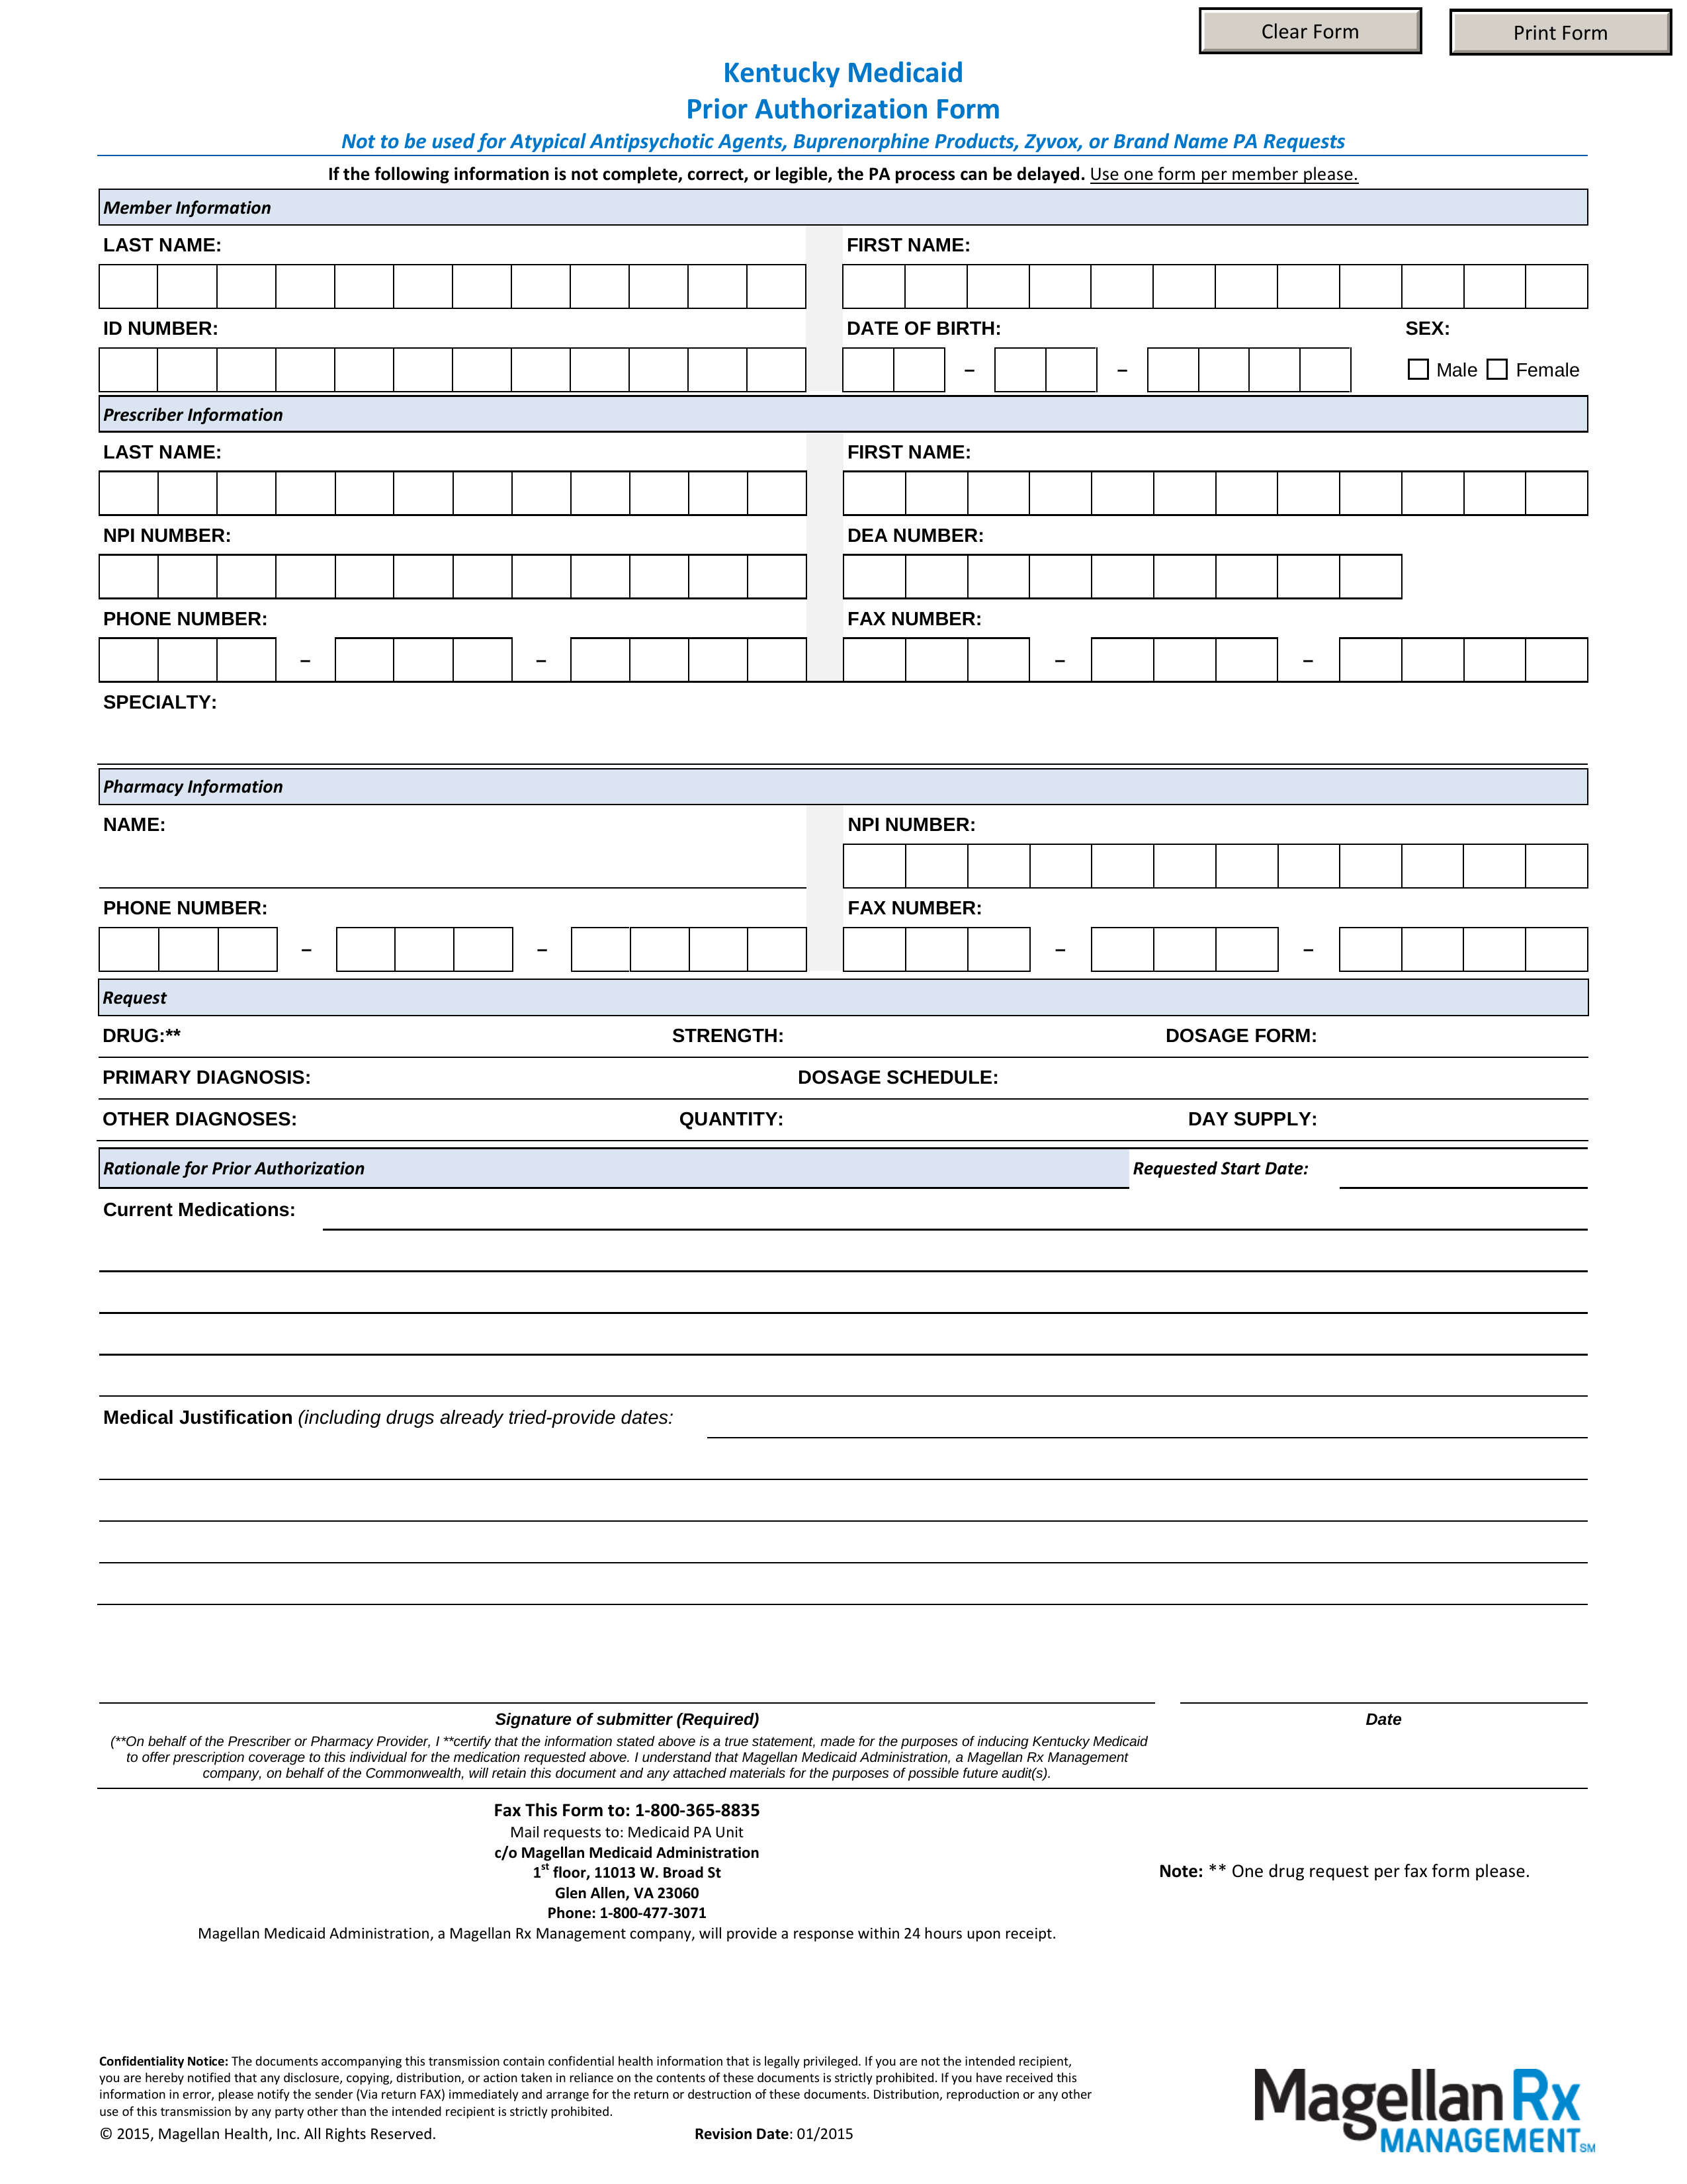 Kentucky Medicaid Prior (Rx) Authorization Form